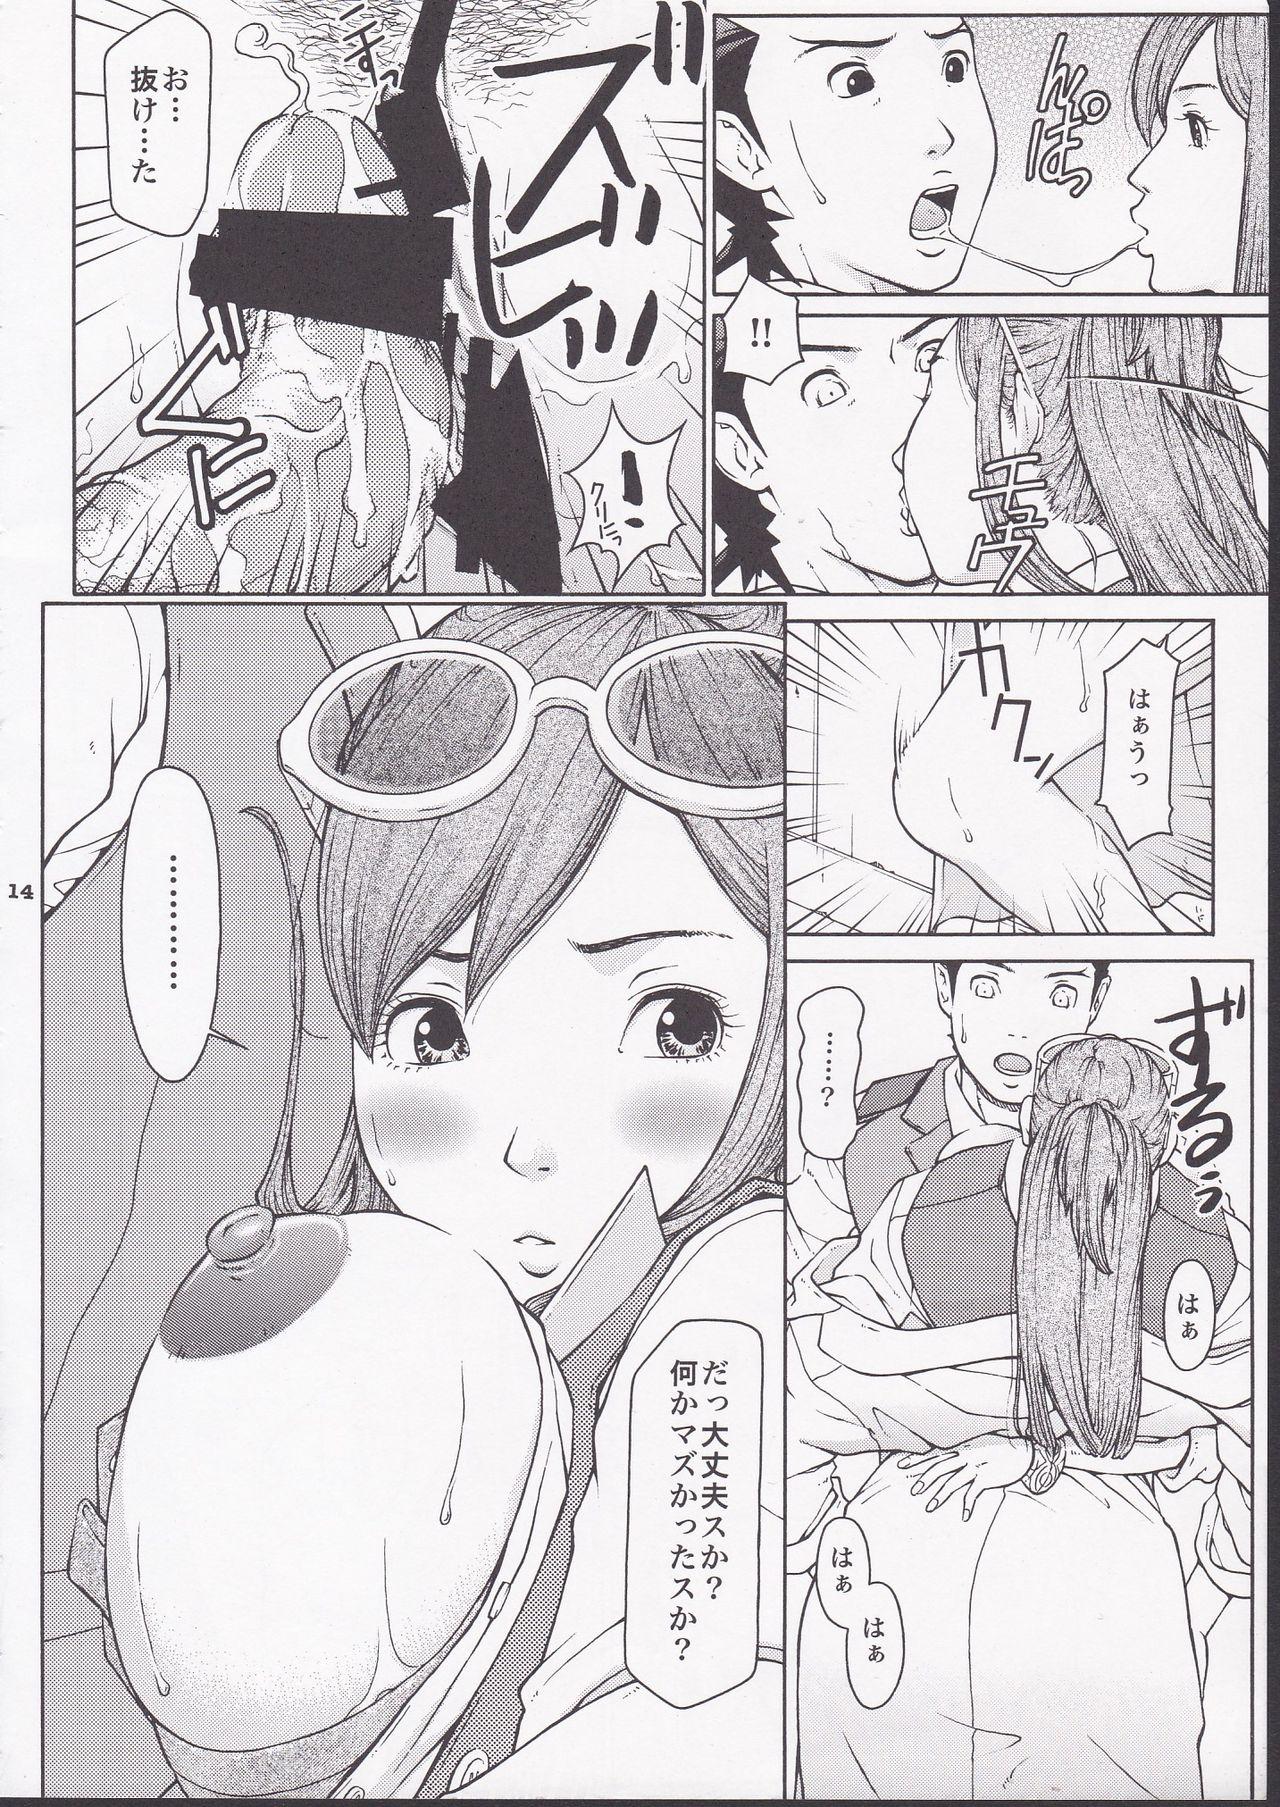 Swinger TWT 6 - Ace attorney Naked - Page 12